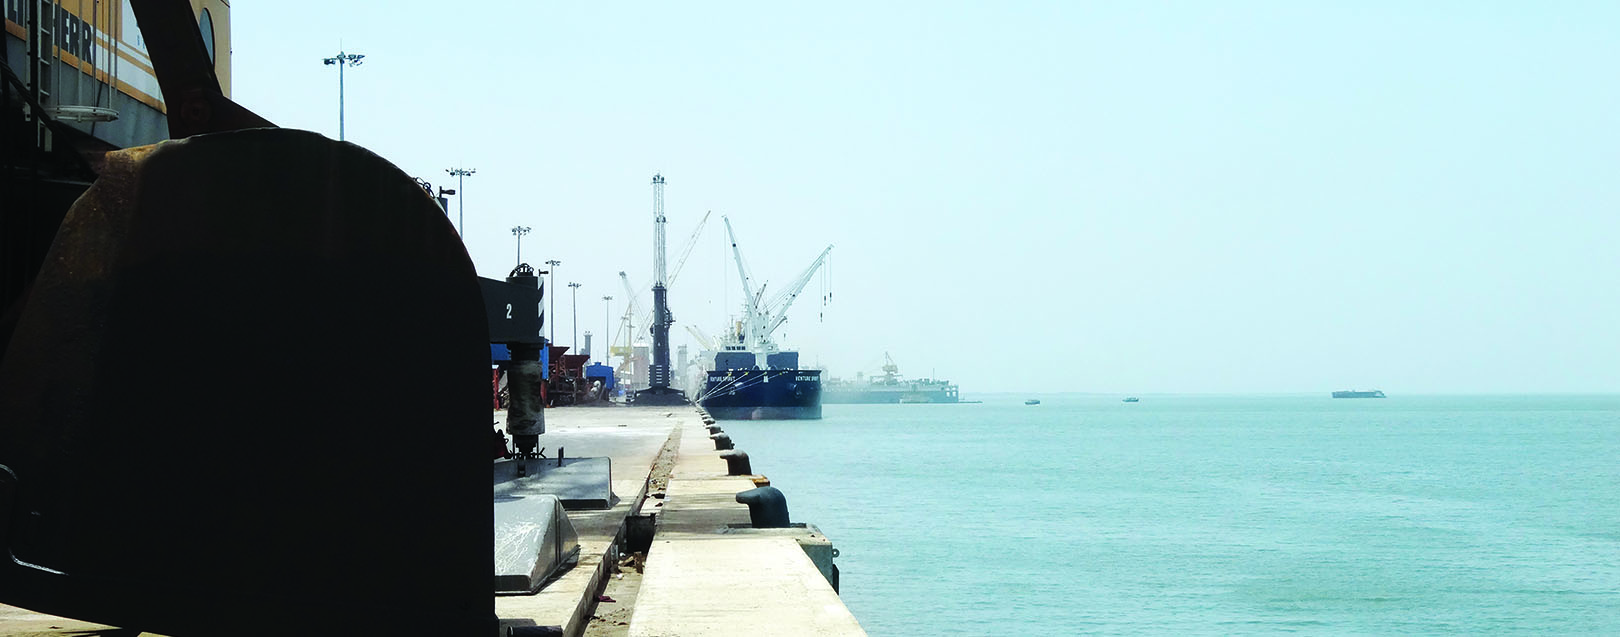 Kakinada Container Terminal-Waking up from the Slumber March 2018 issue